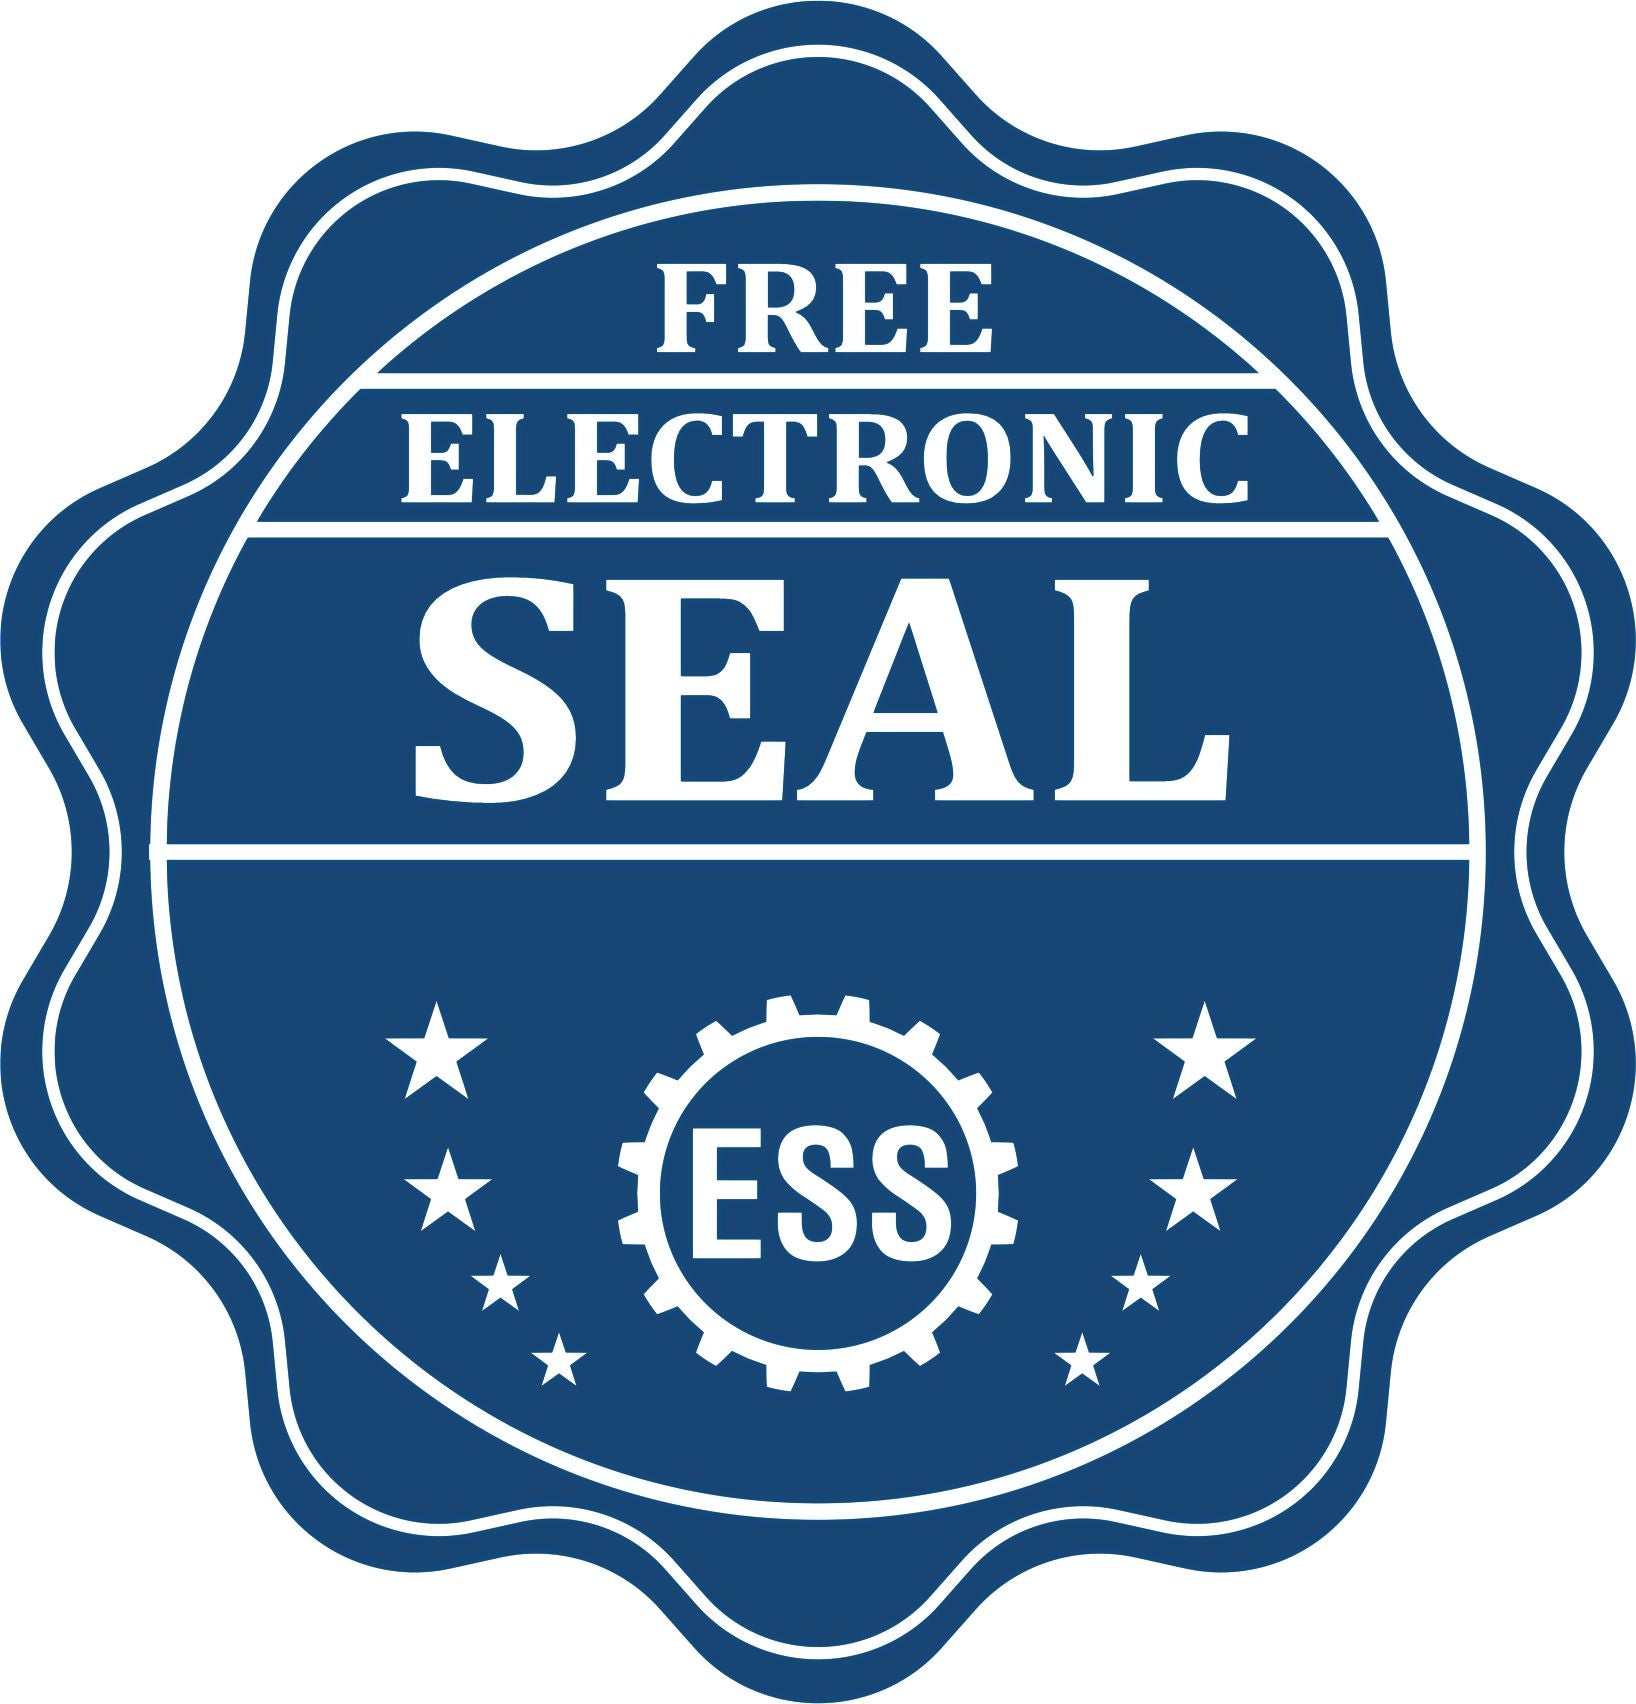 A badge showing a free electronic seal for the Slim Pre-Inked New Hampshire Professional Geologist Seal Stamp with stars and the ESS gear on the emblem.